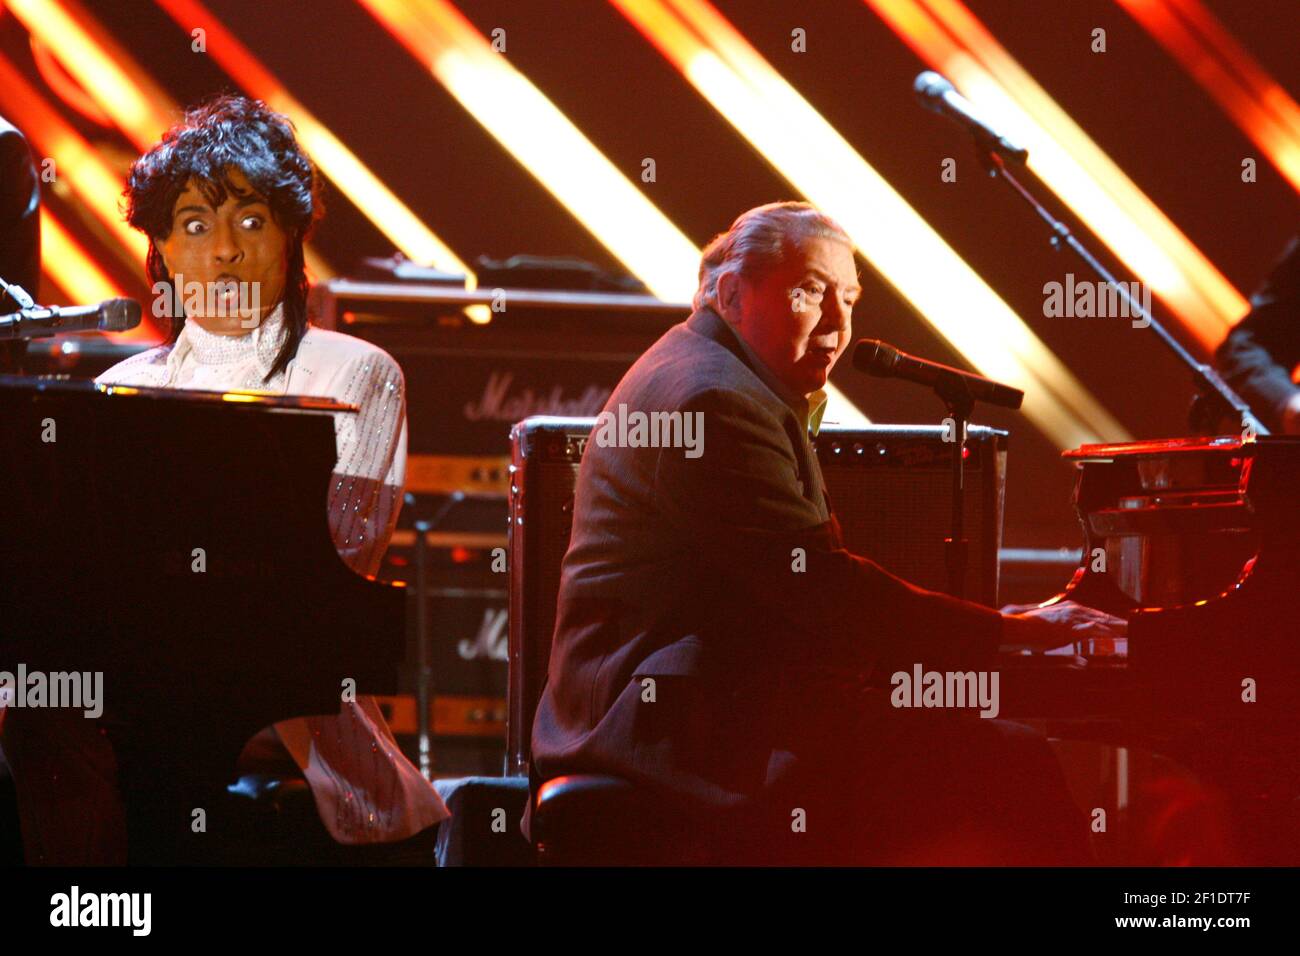 Feb 10, 2008; Los Angeles, CA, U.S.A; Little RIchard, left, and Jerry Lee Lewis, right, perform during the 50th annual Grammy Awards at the Staples Center in Los Angeles, CA. Mandatory Credit: Robert Hanashiro-USA TODAY/Sipa USA Stock Photo